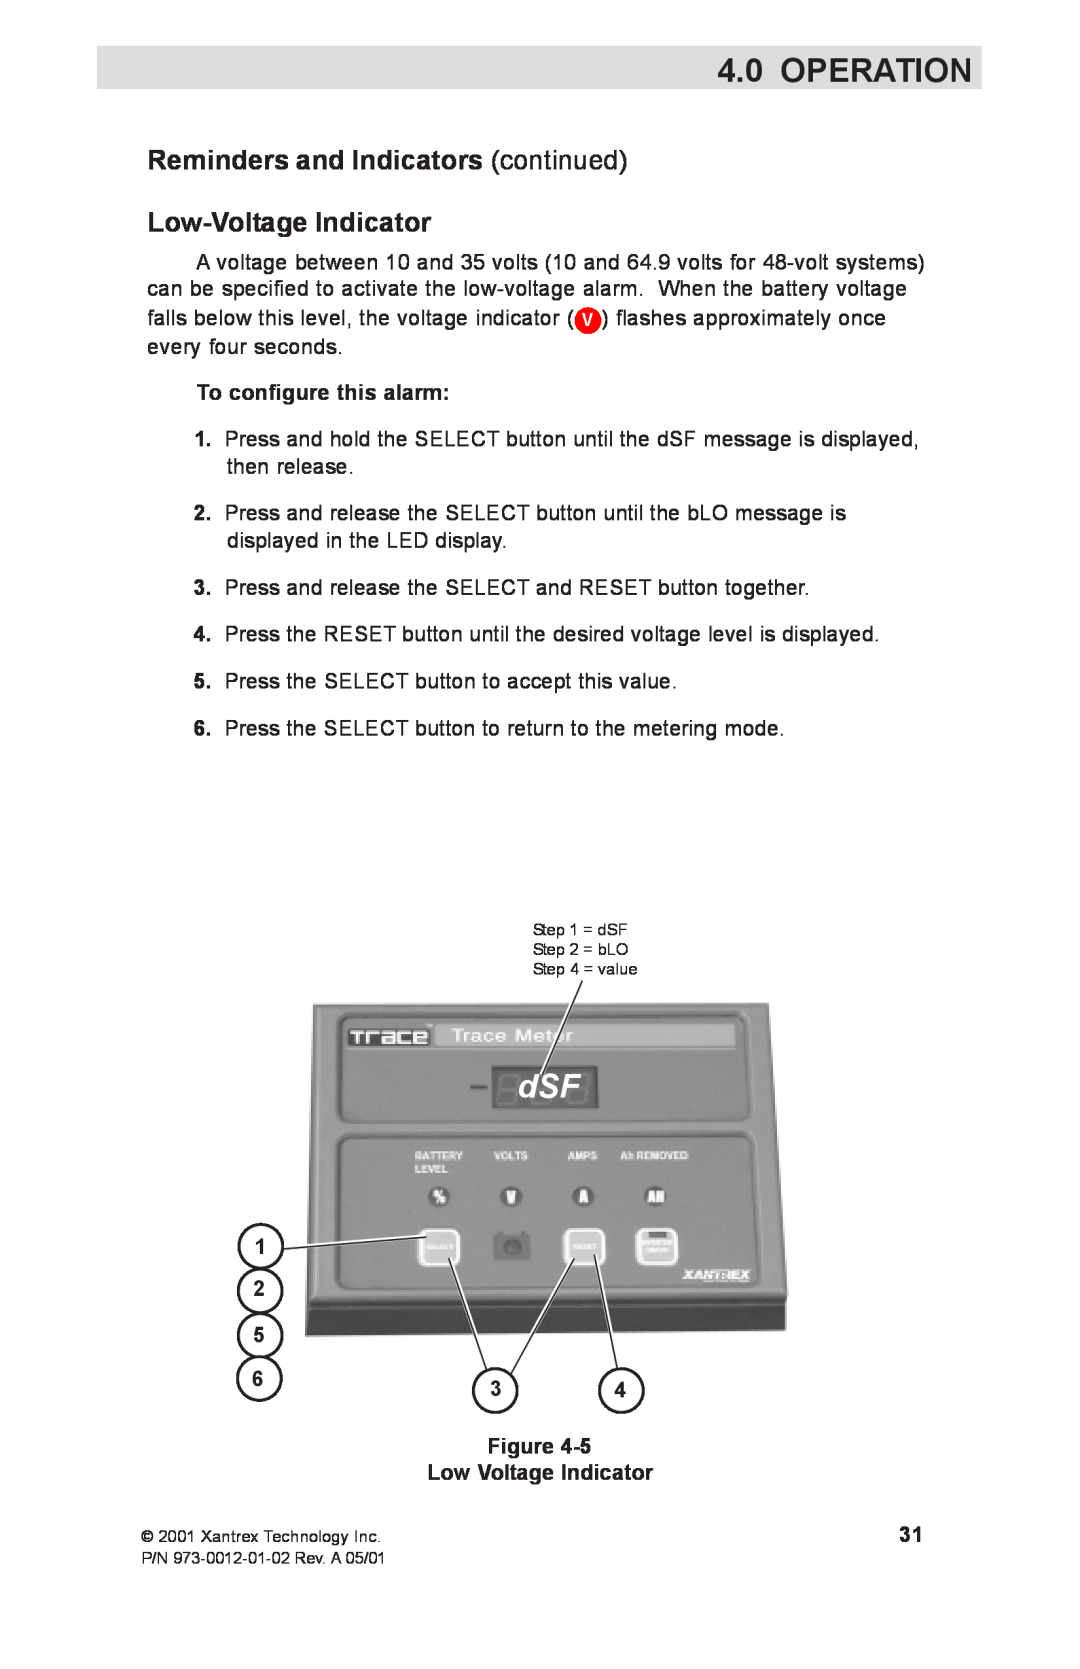 Xantrex Technology TM500A Reminders and Indicators continued Low-Voltage Indicator, To configure this alarm, Operation 